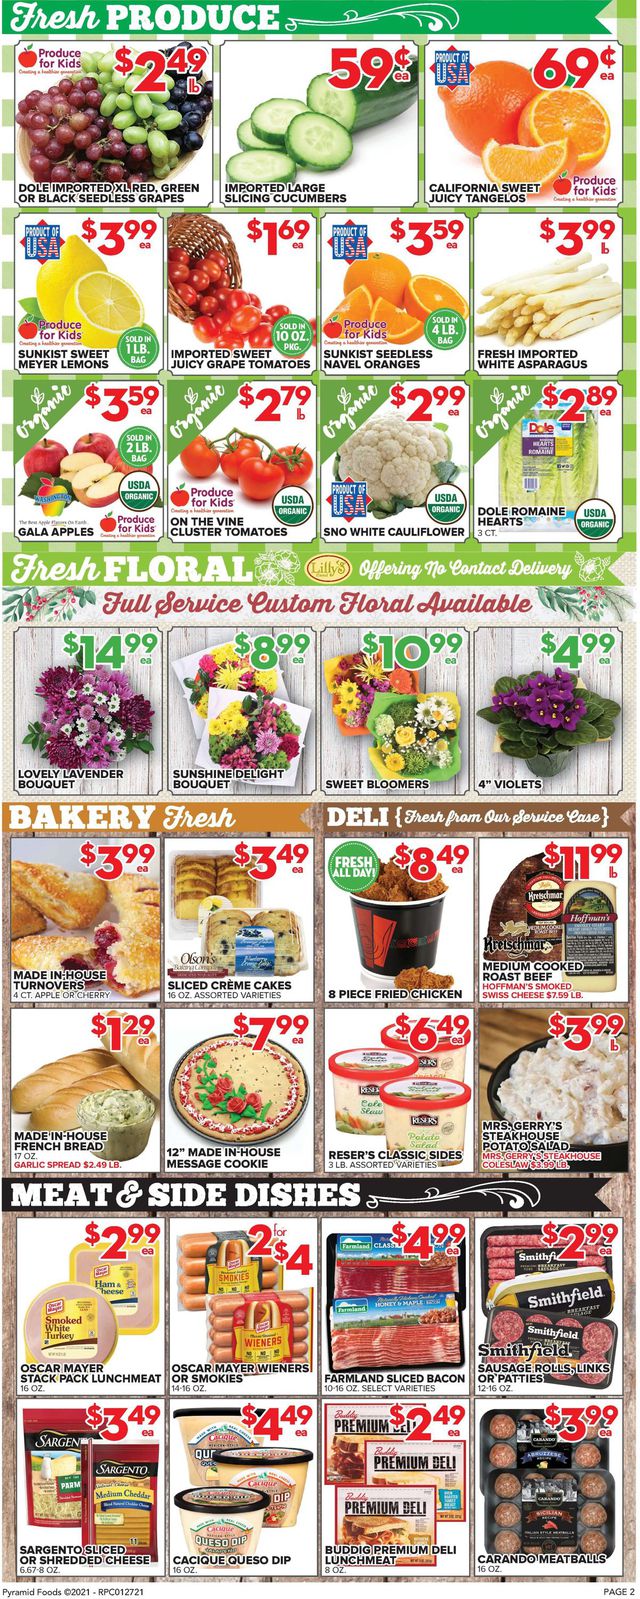 Price Cutter Ad from 01/27/2021